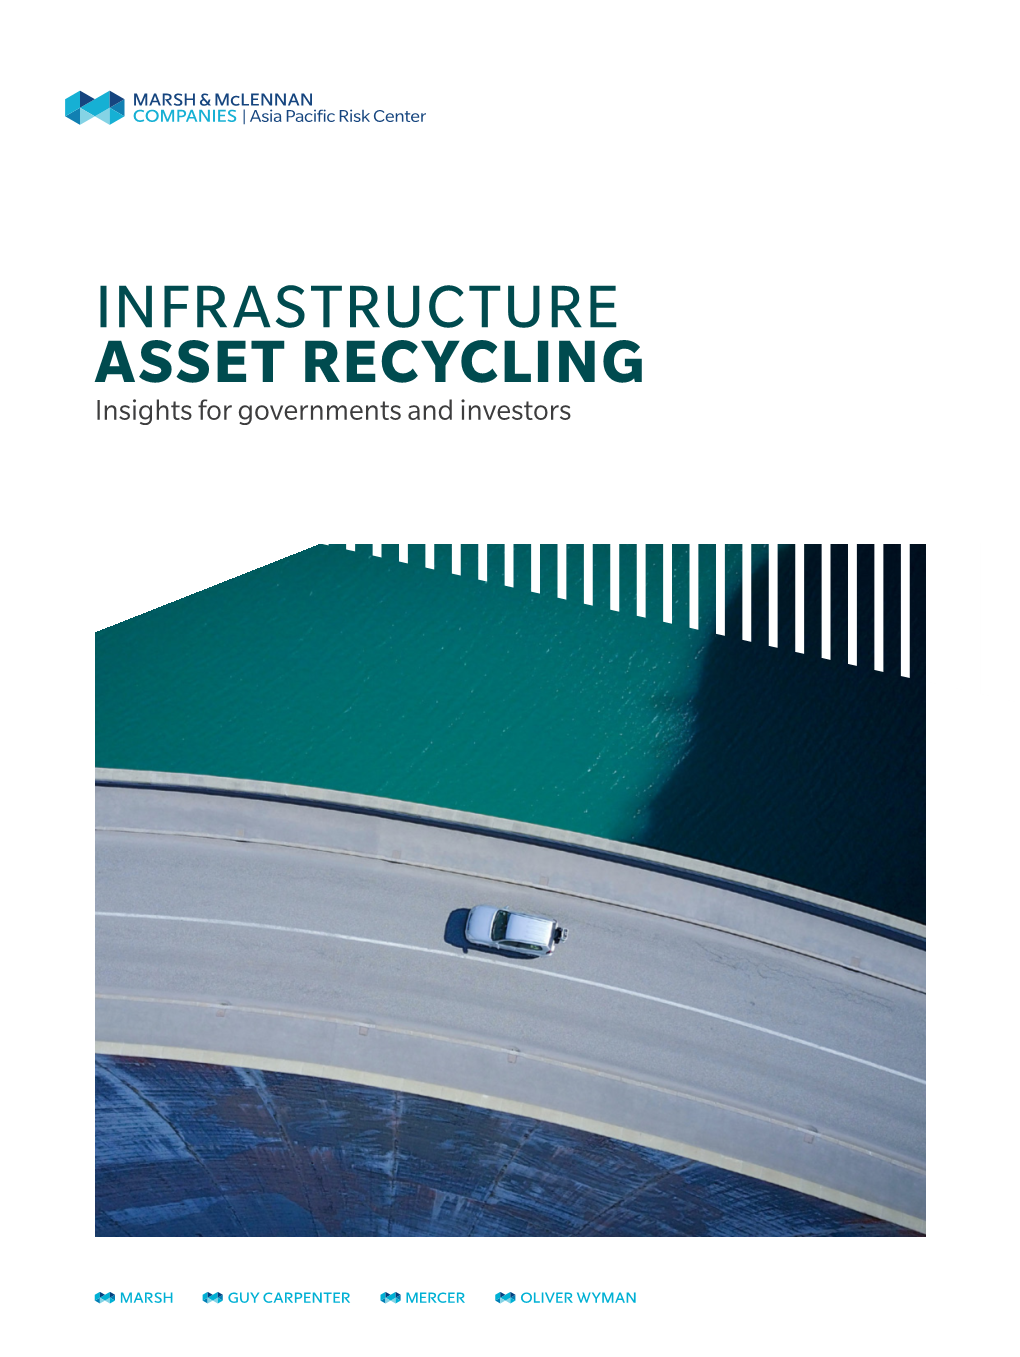 INFRASTRUCTURE ASSET RECYCLING Insights for Governments and Investors